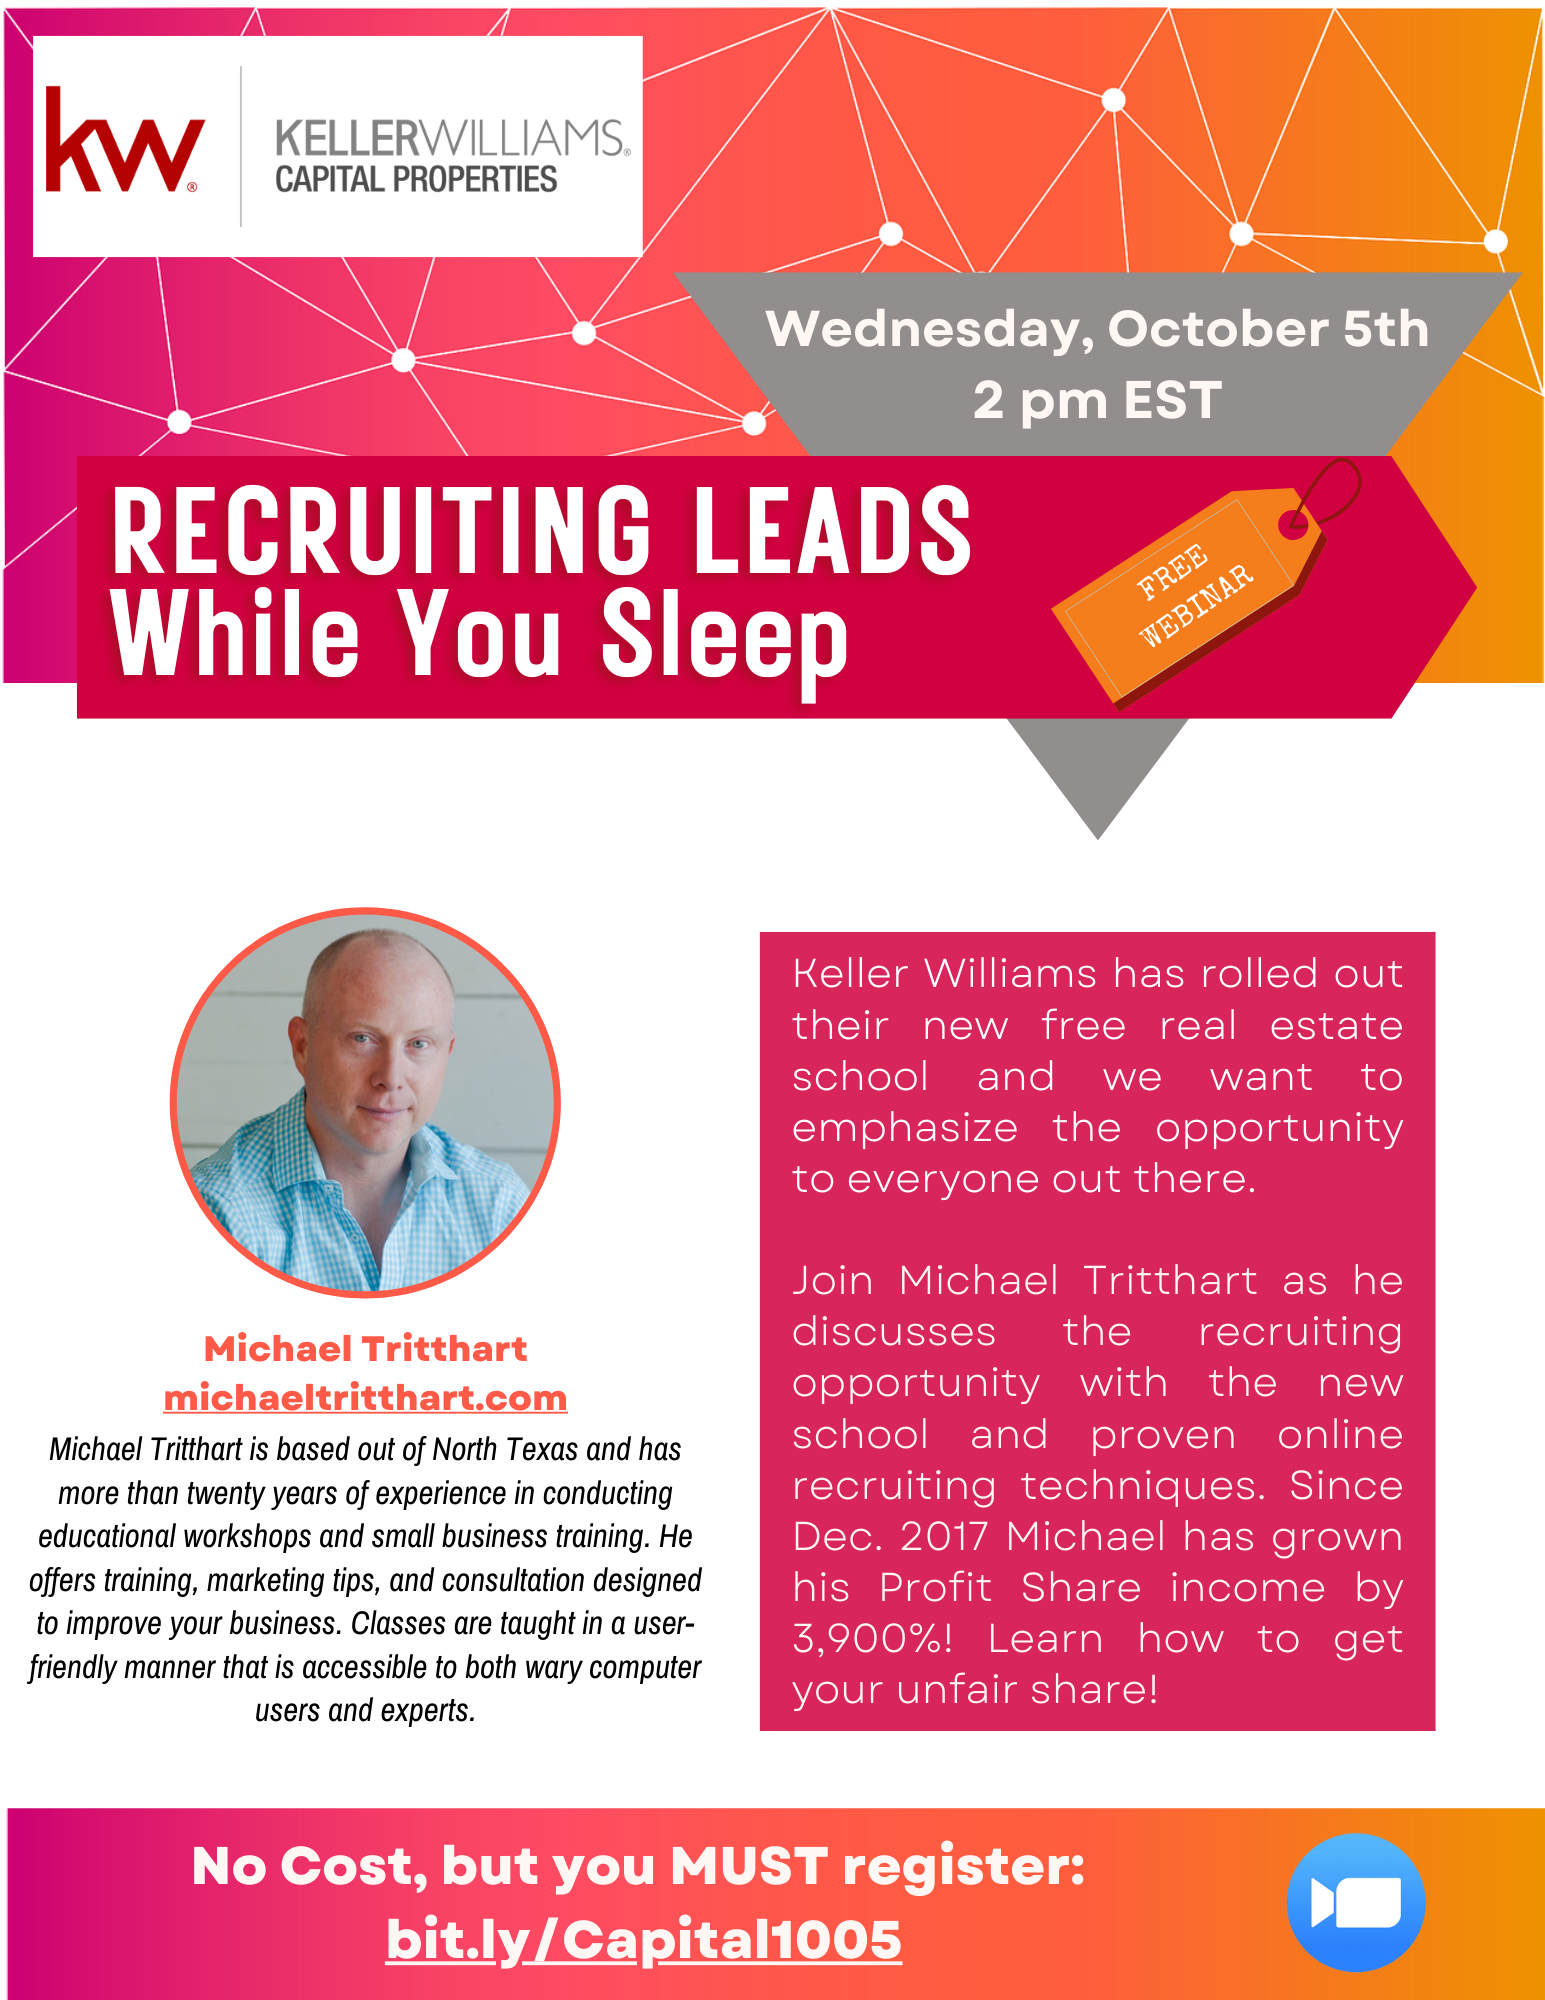 Generating Recruiting Leads While You Sleep